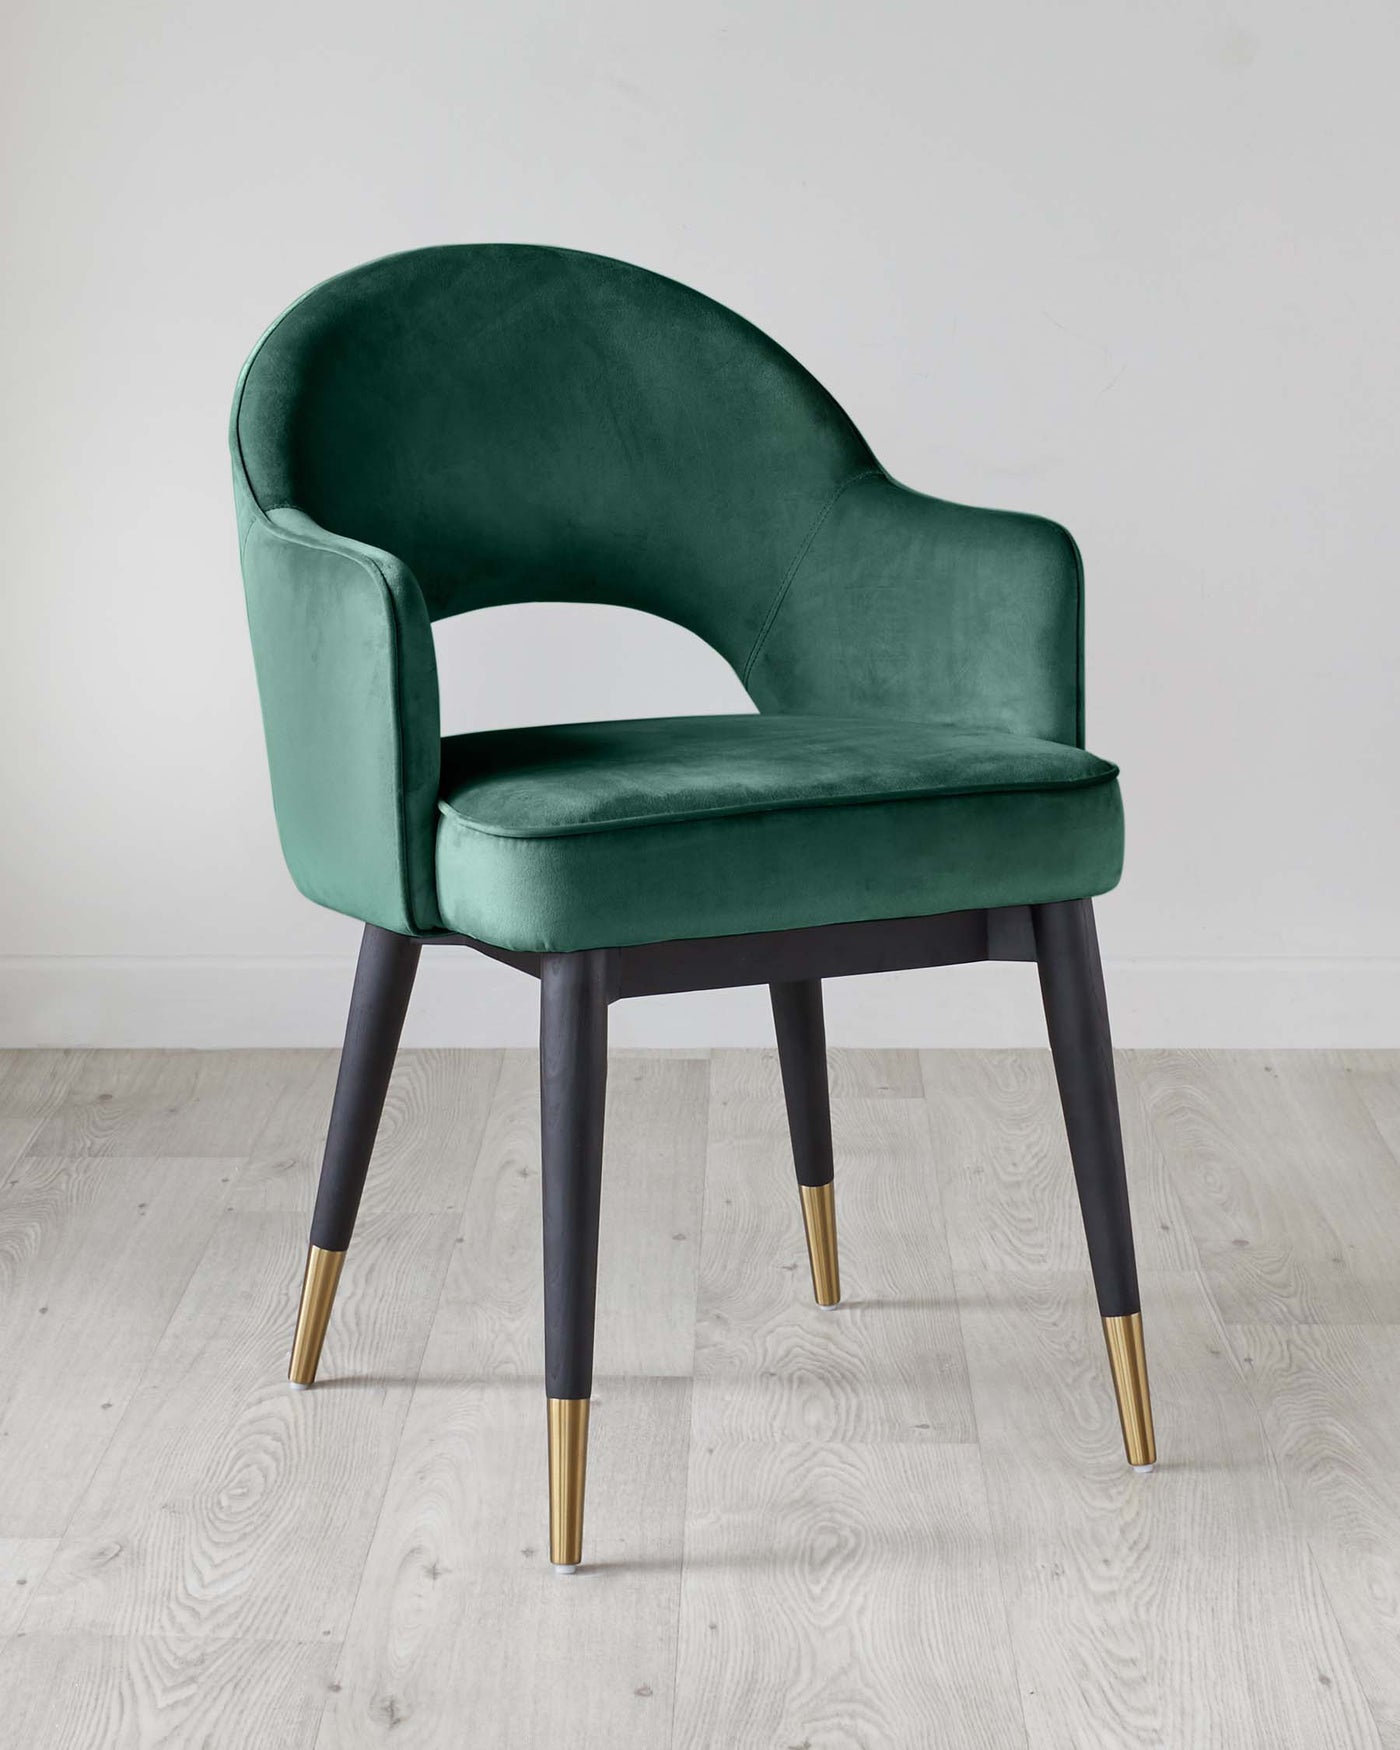 Elegant modern armchair with dark green velvet upholstery and matte black legs tipped with brass accents, set against a light grey wooden floor and white wall background.